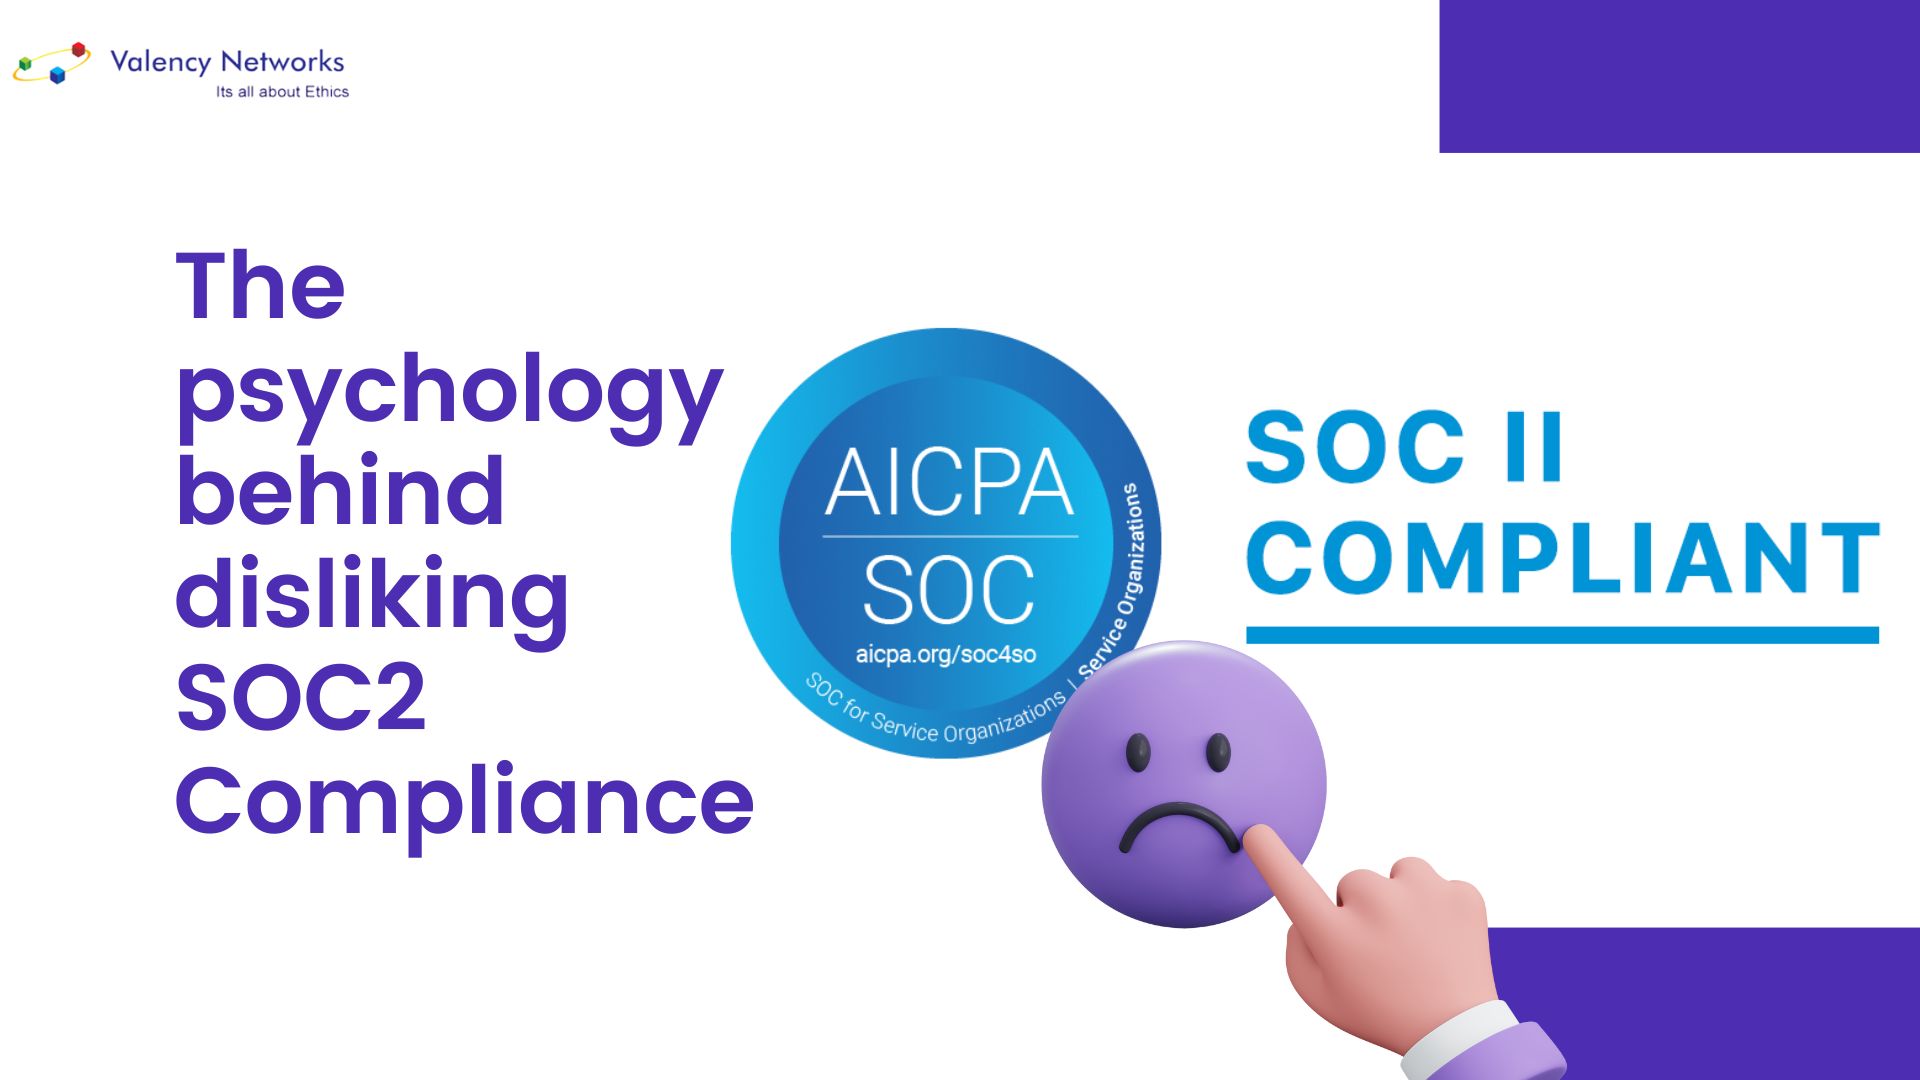 The Psychology behind disliking SOC2 Compliance